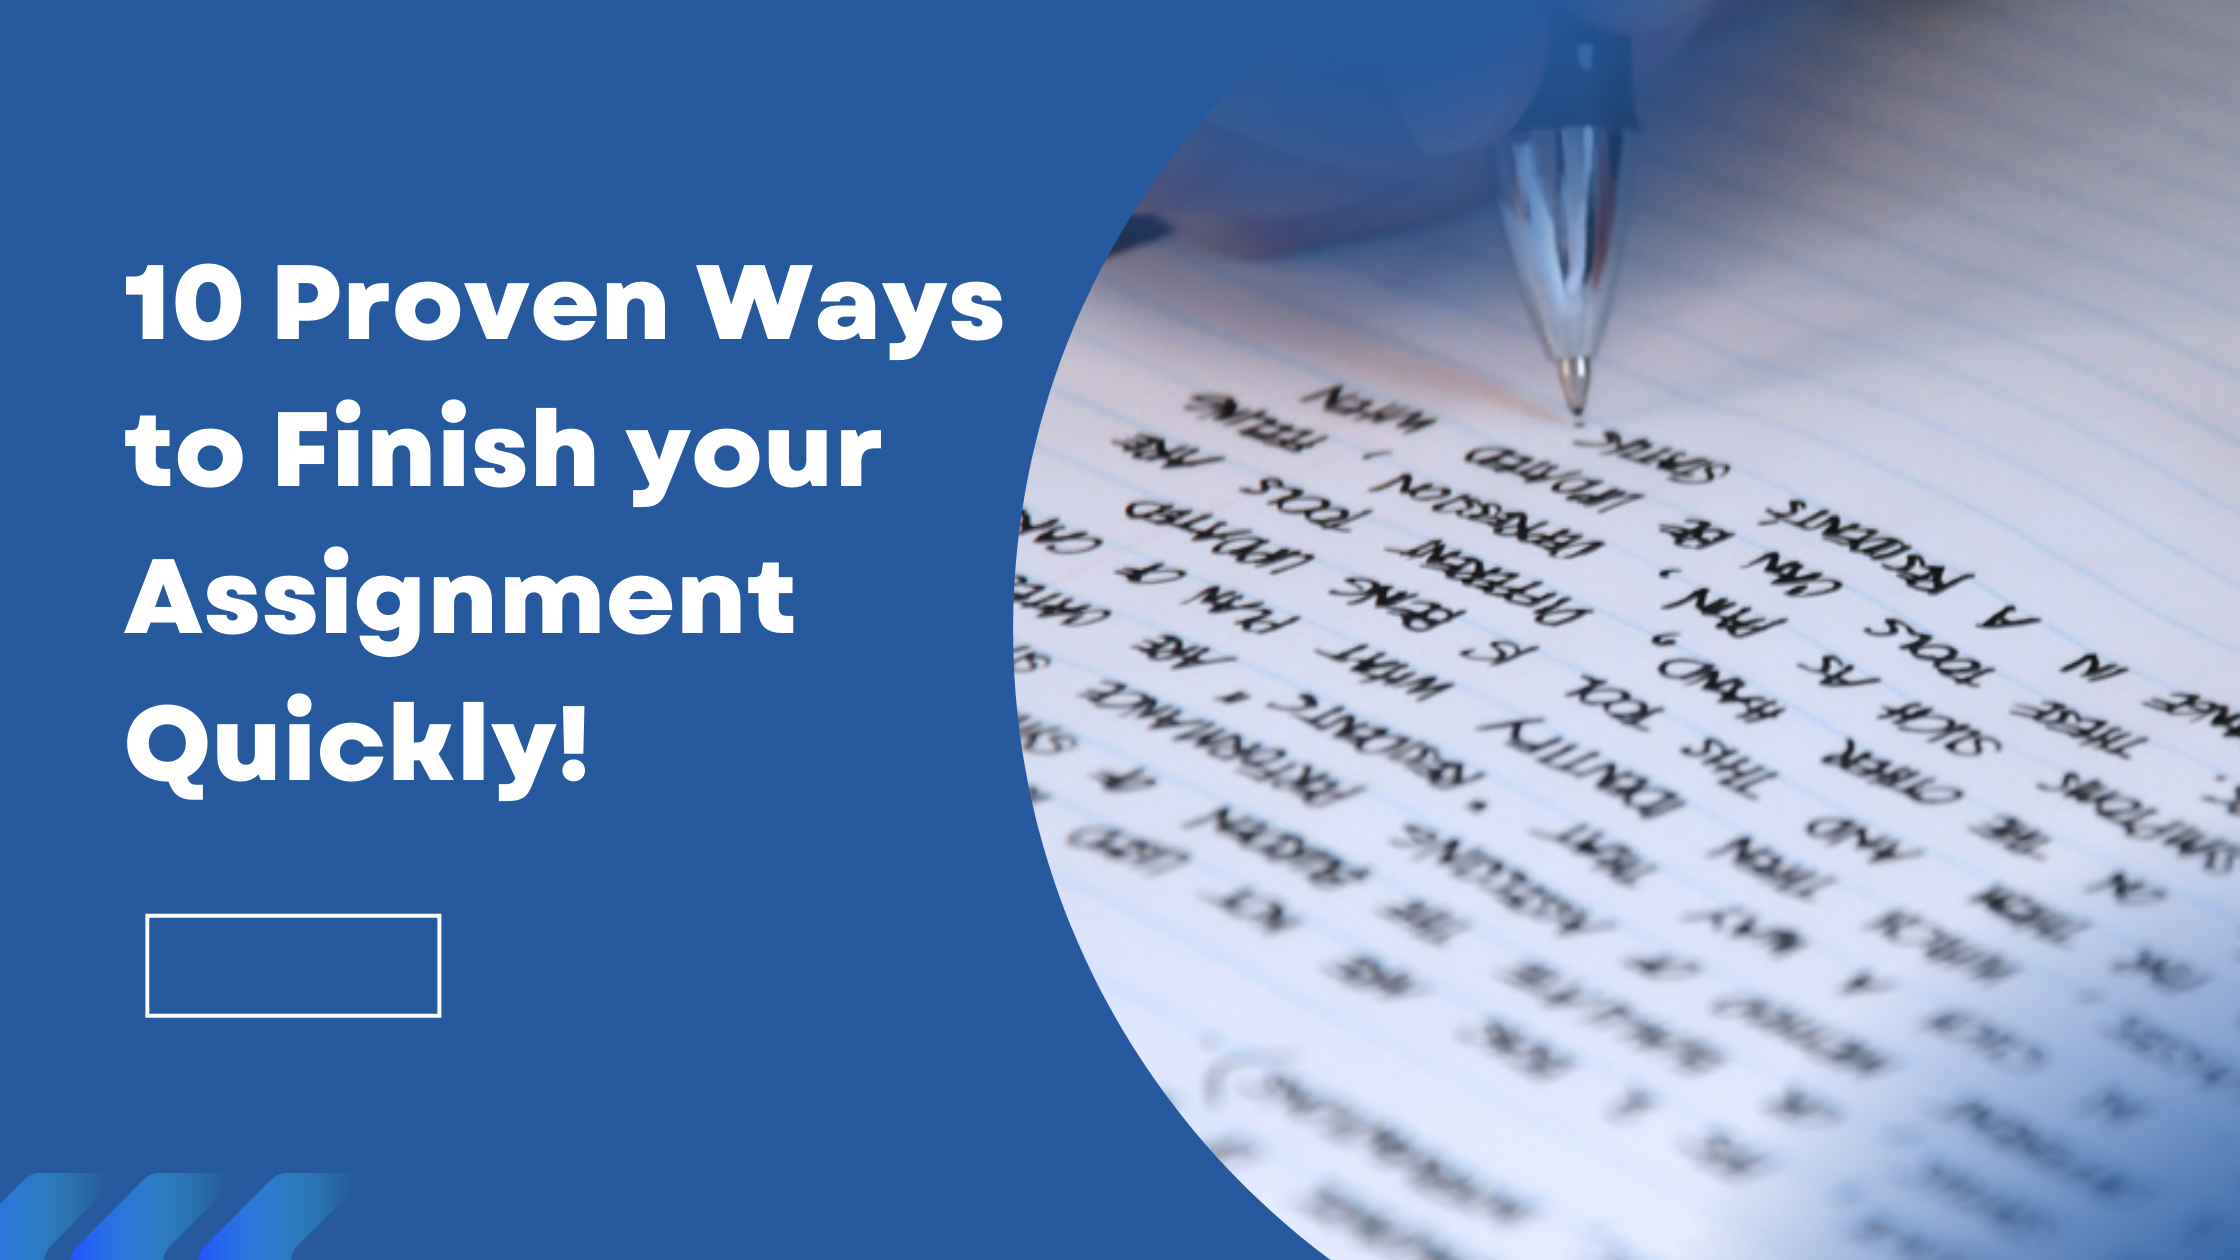 10 Proven Ways to Finish your Assignment Quickly!